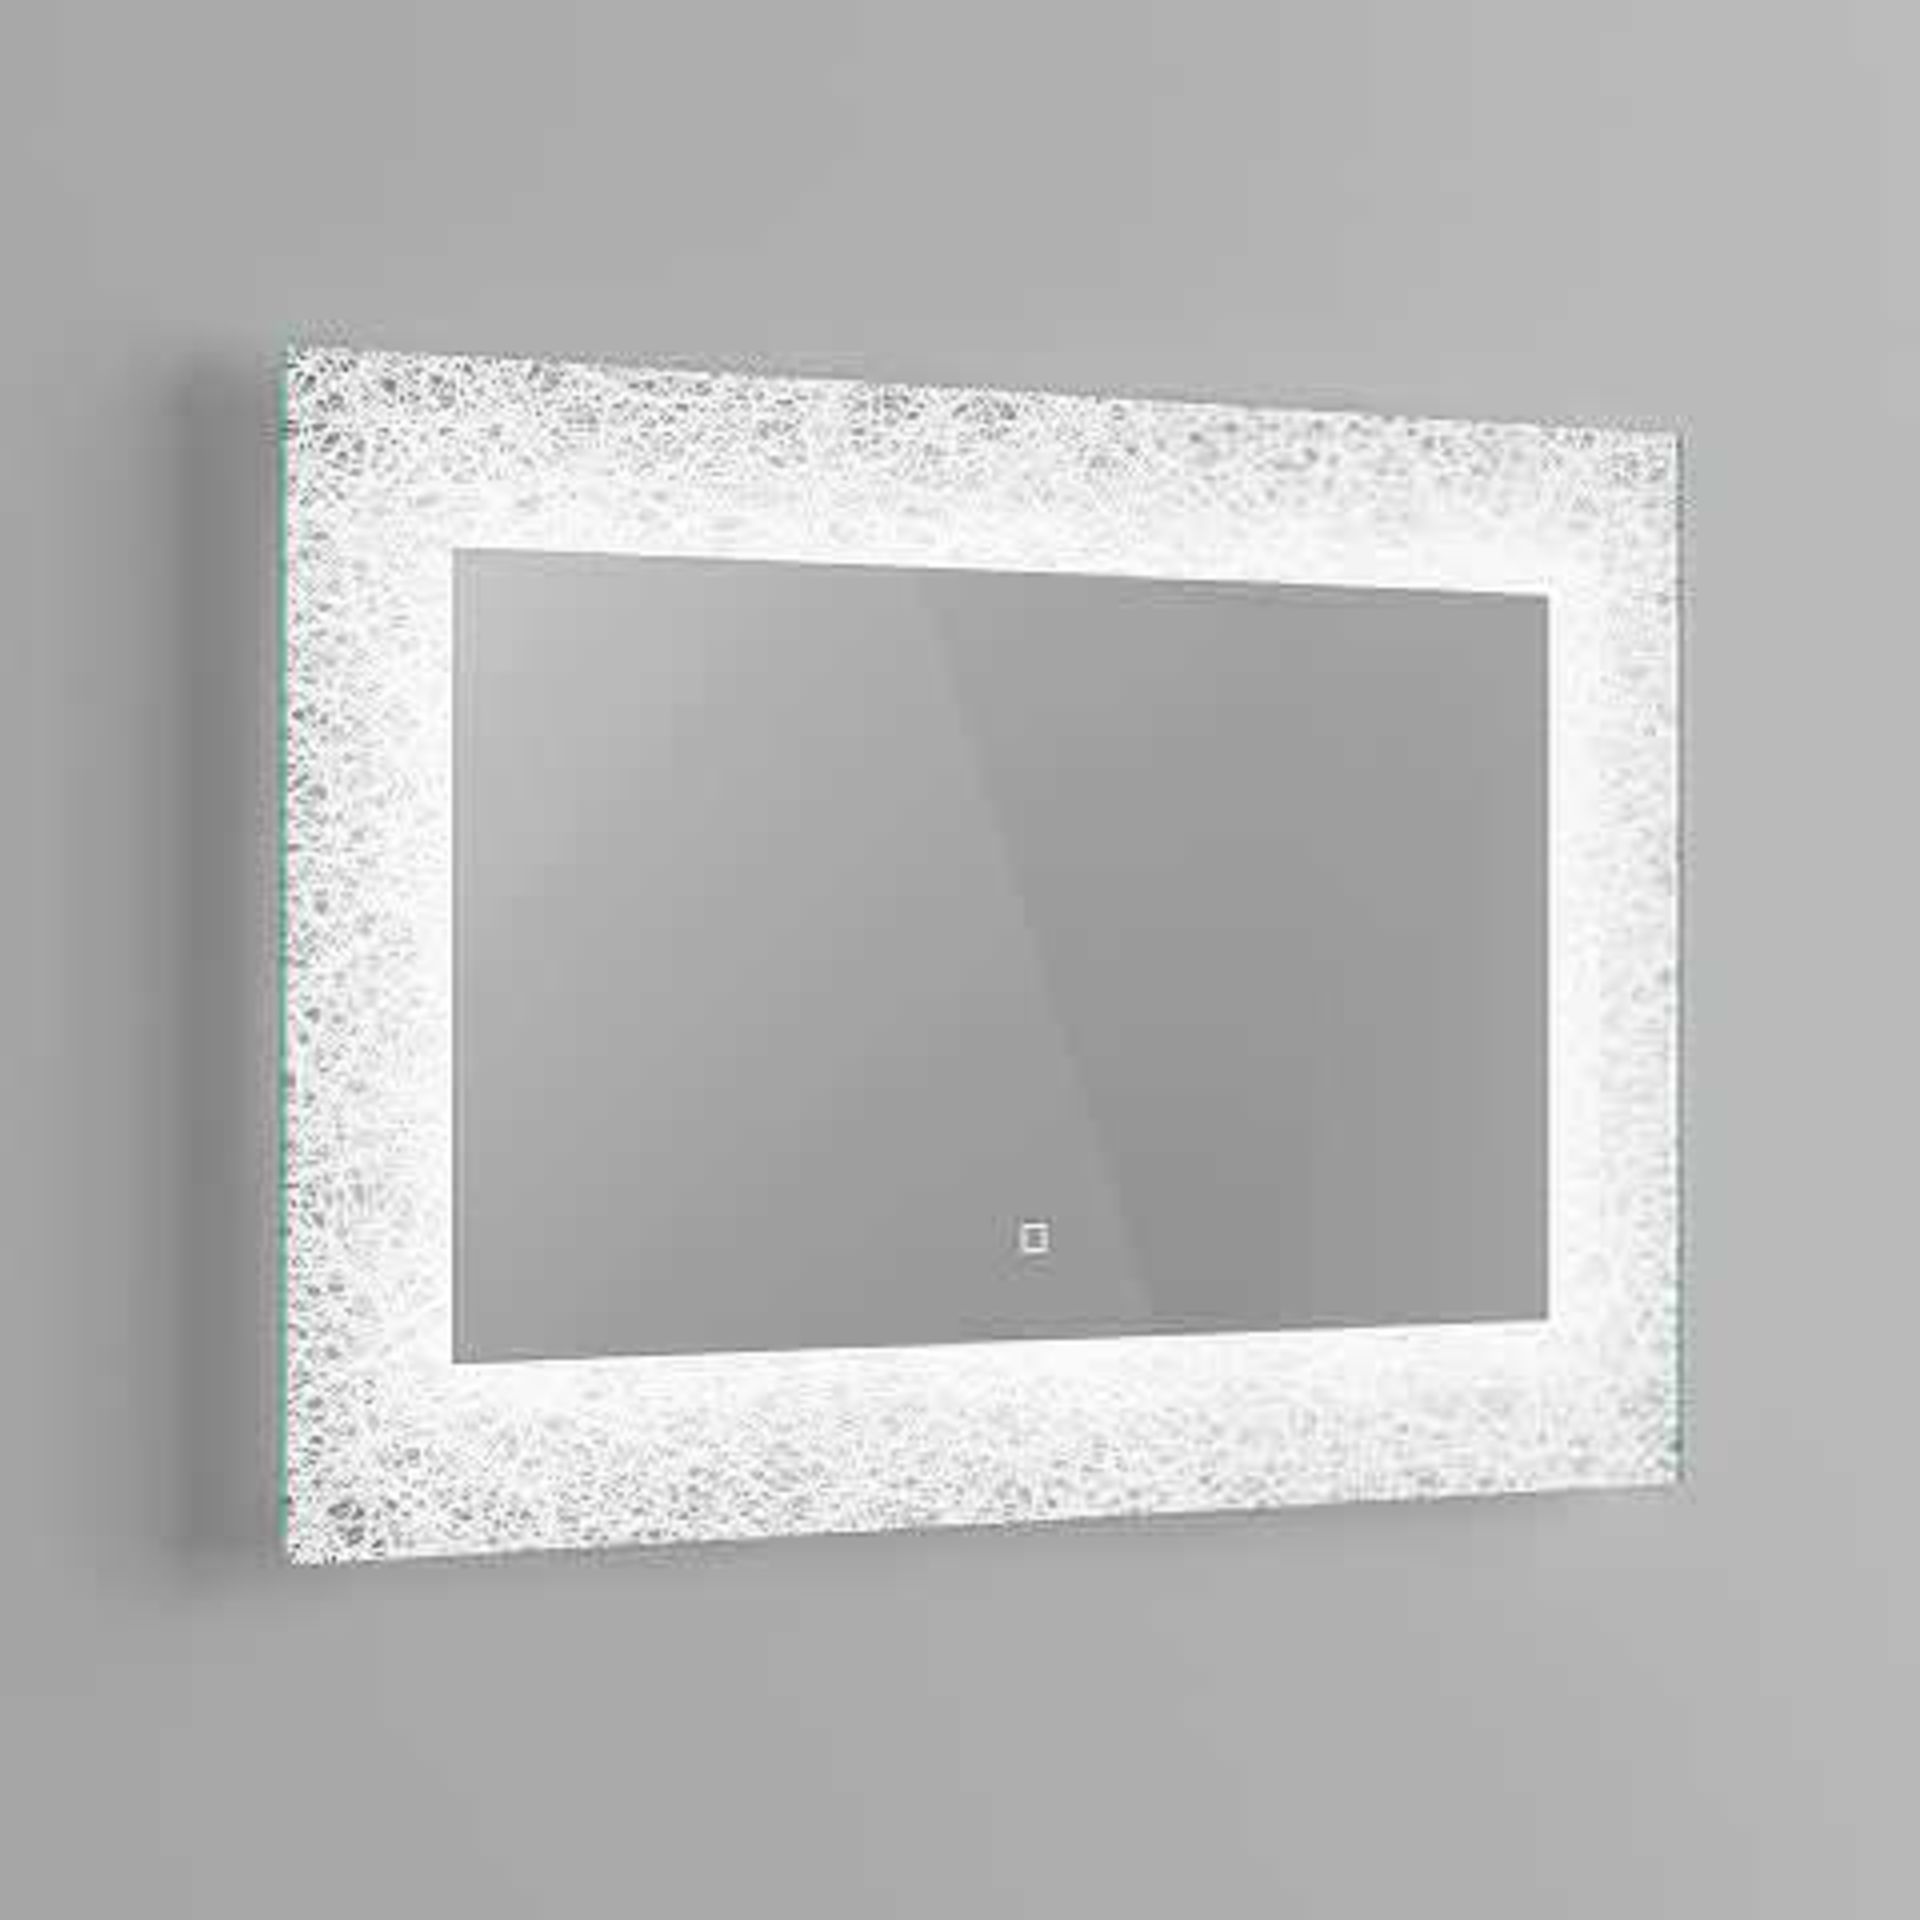 (M2) 600x900mm Galactic Designer Illuminated LED Mirror - Switch Control Light up your bathroom with - Image 3 of 4